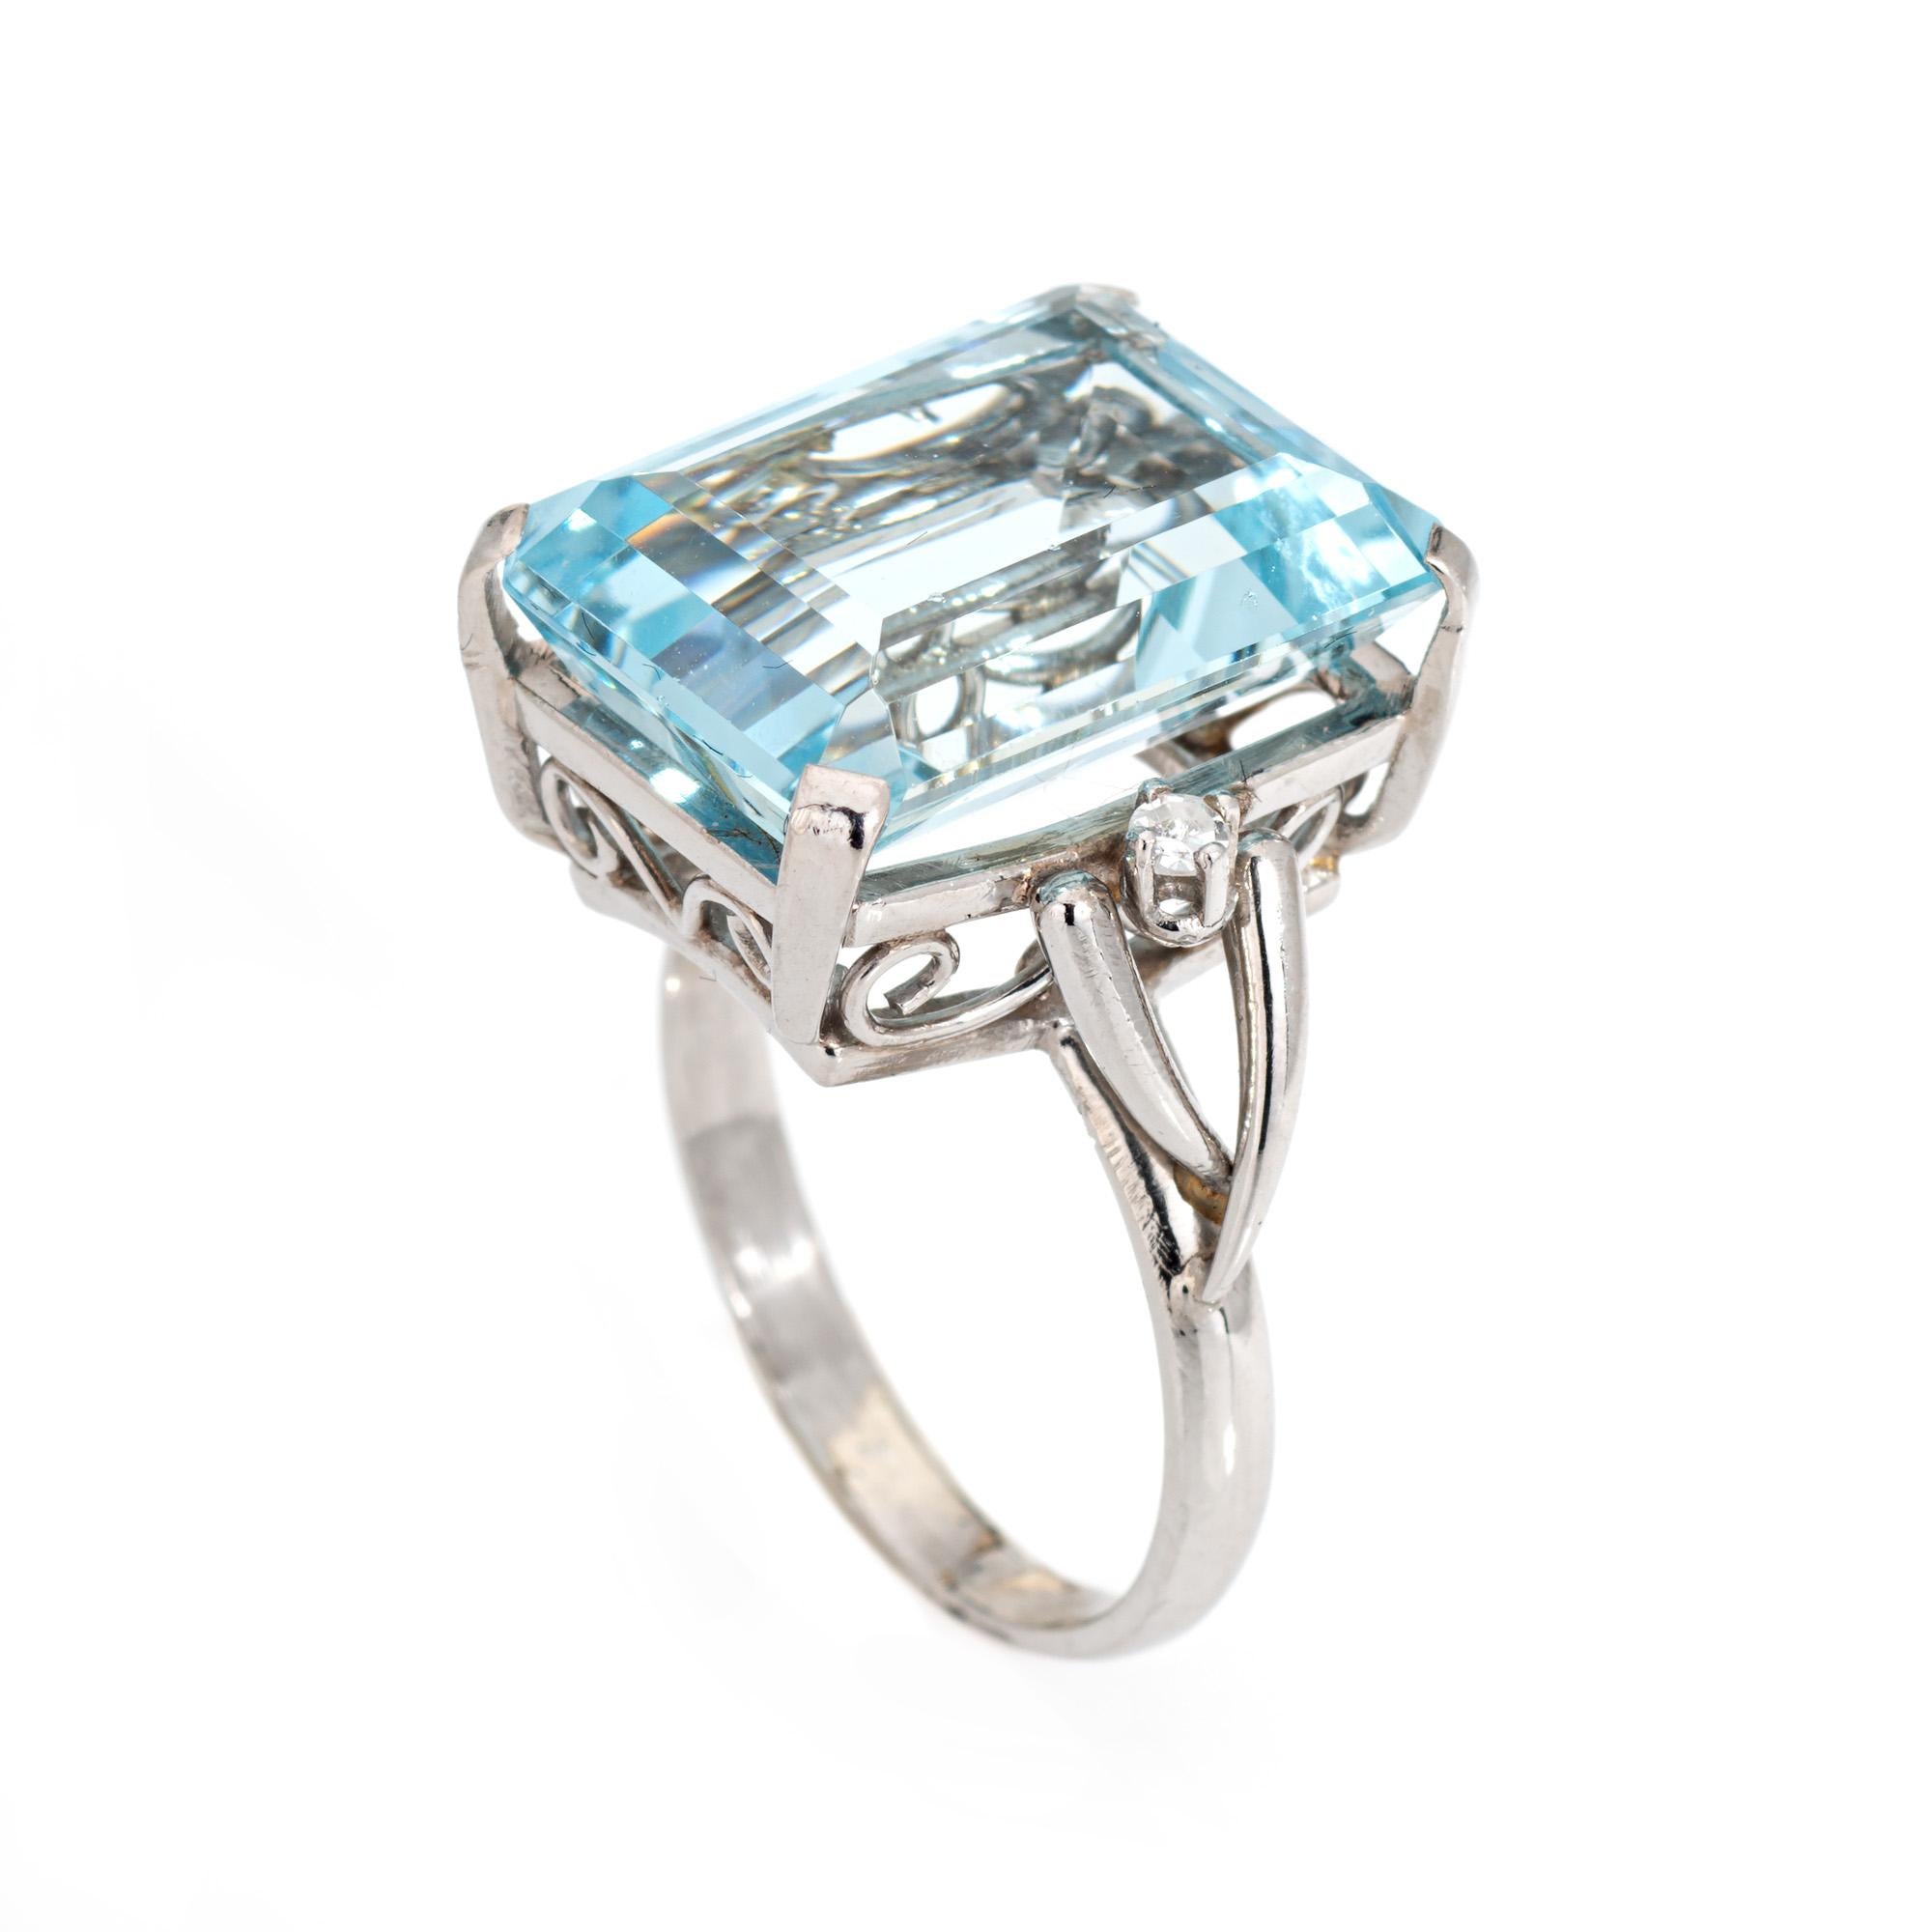 Stylish vintage aquamarine & diamond cocktail ring (circa 1960s to 1970s) crafted in 900 platinum. 

Emerald cut aquamarine measures 16mm x 12mm (estimated at 10 carats), accented with 2 single cut diamonds that total an estimated 0.04 carats